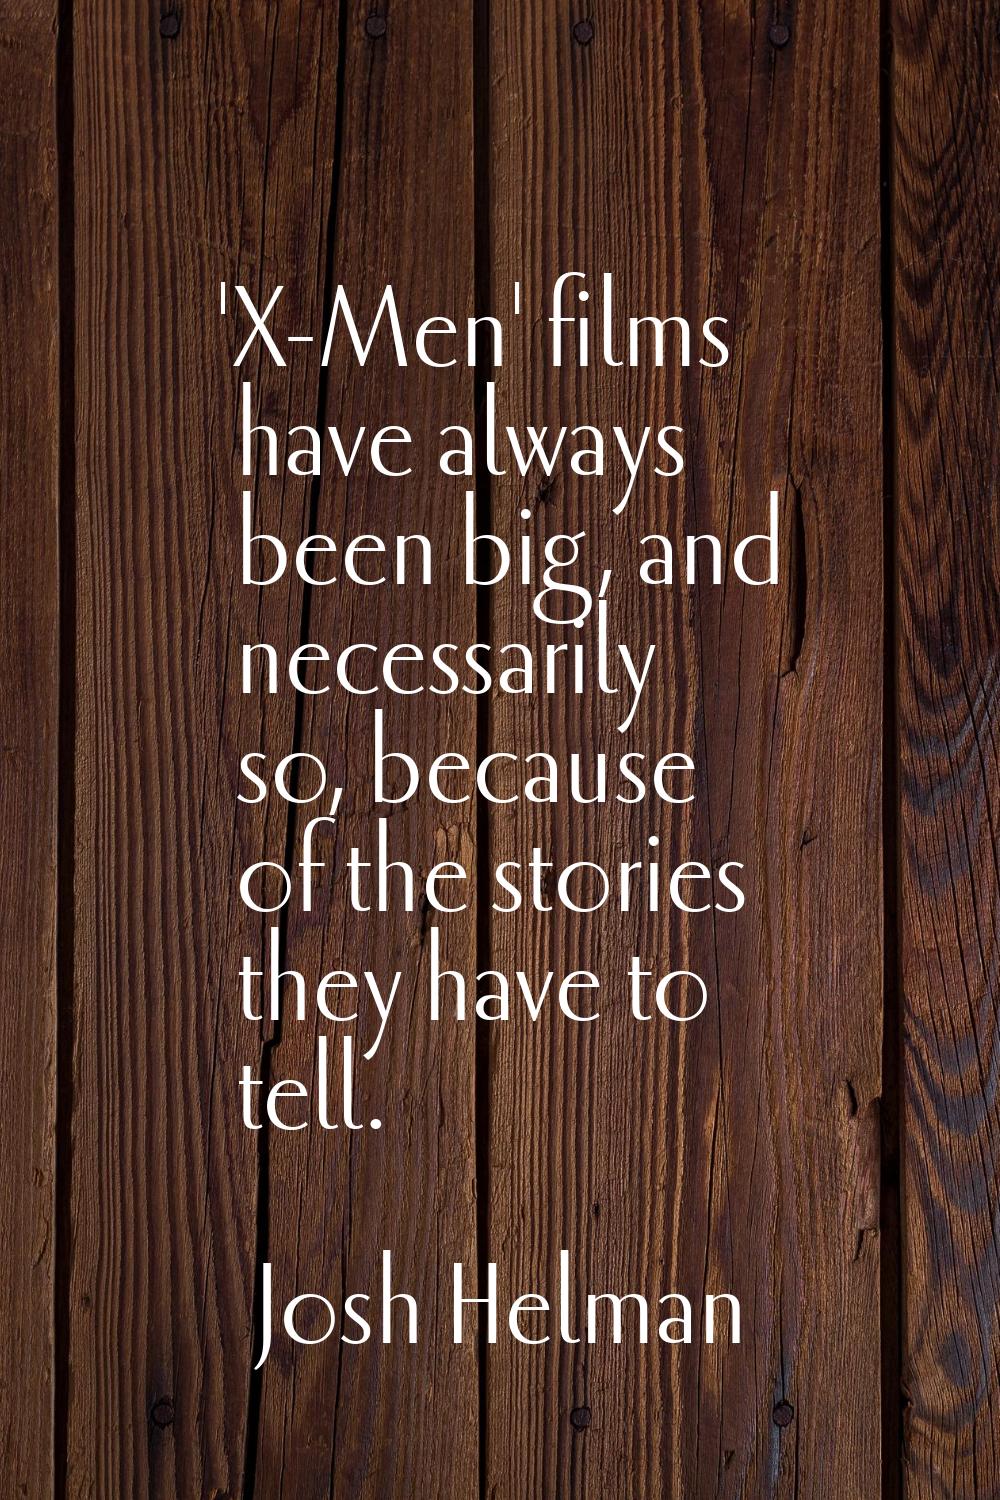 'X-Men' films have always been big, and necessarily so, because of the stories they have to tell.